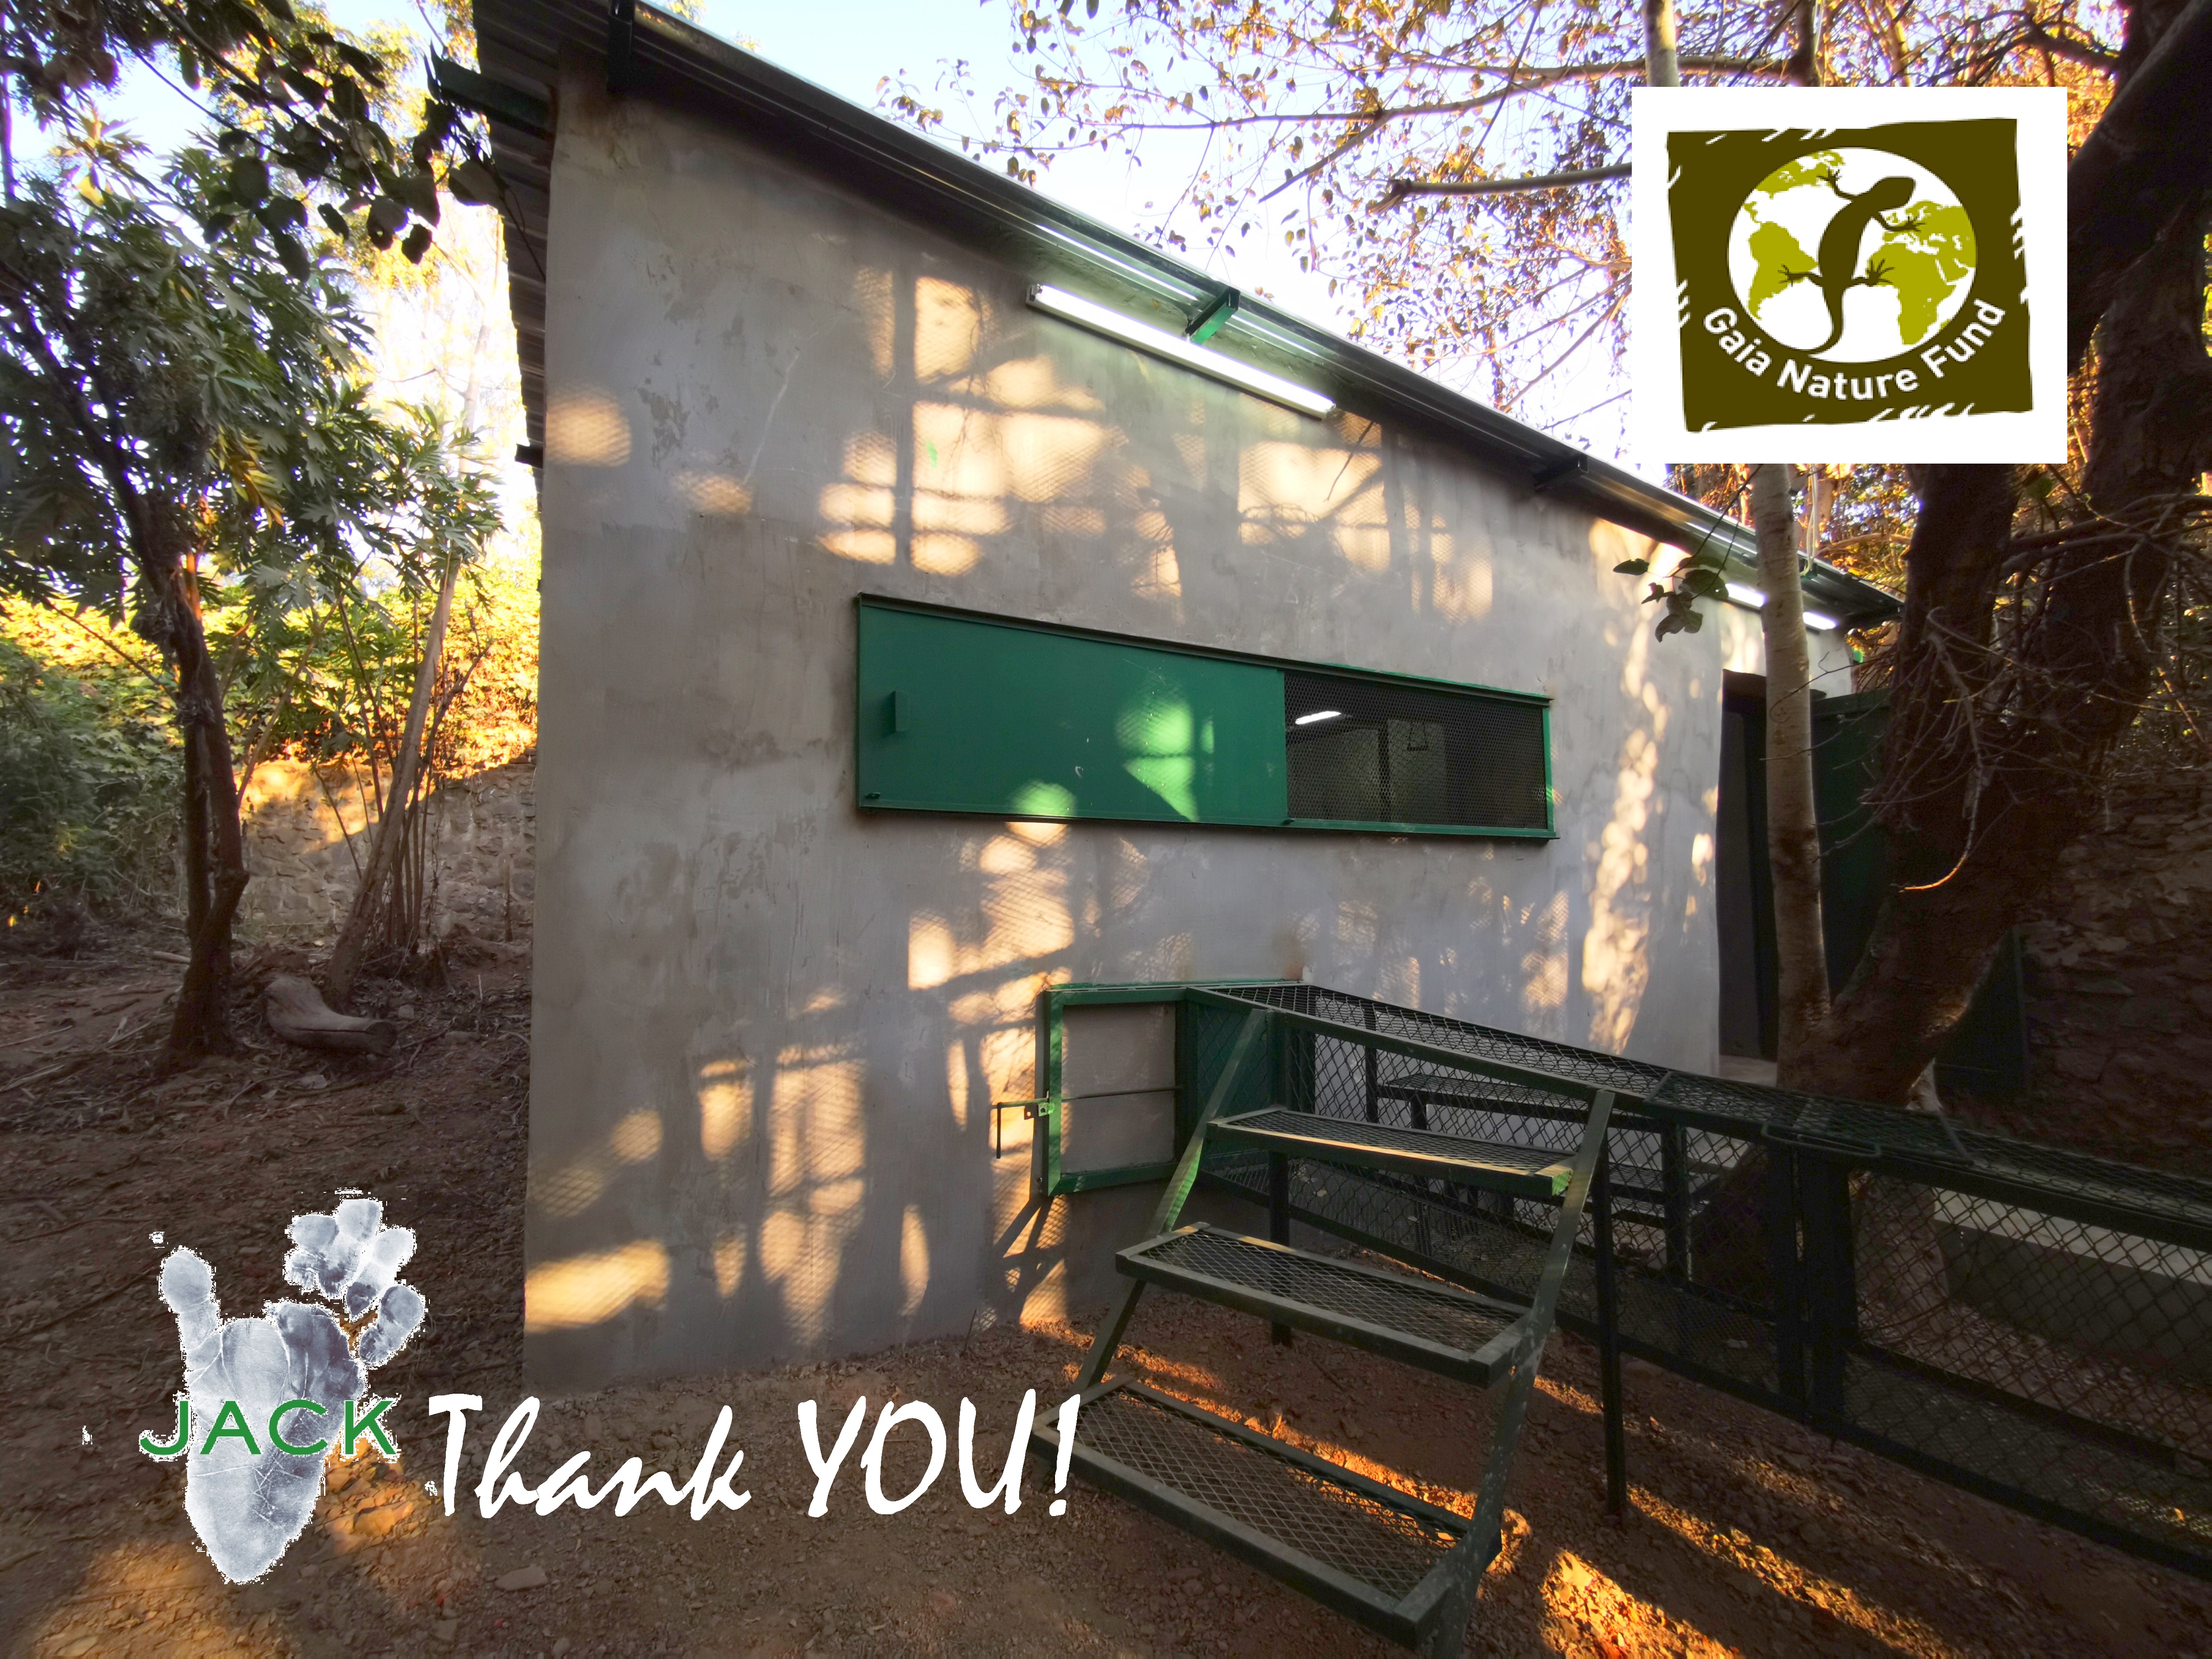 The Gaia Nature Fund contributes to the building of warm night rooms for golden bellies repatriated from Zimbabwe